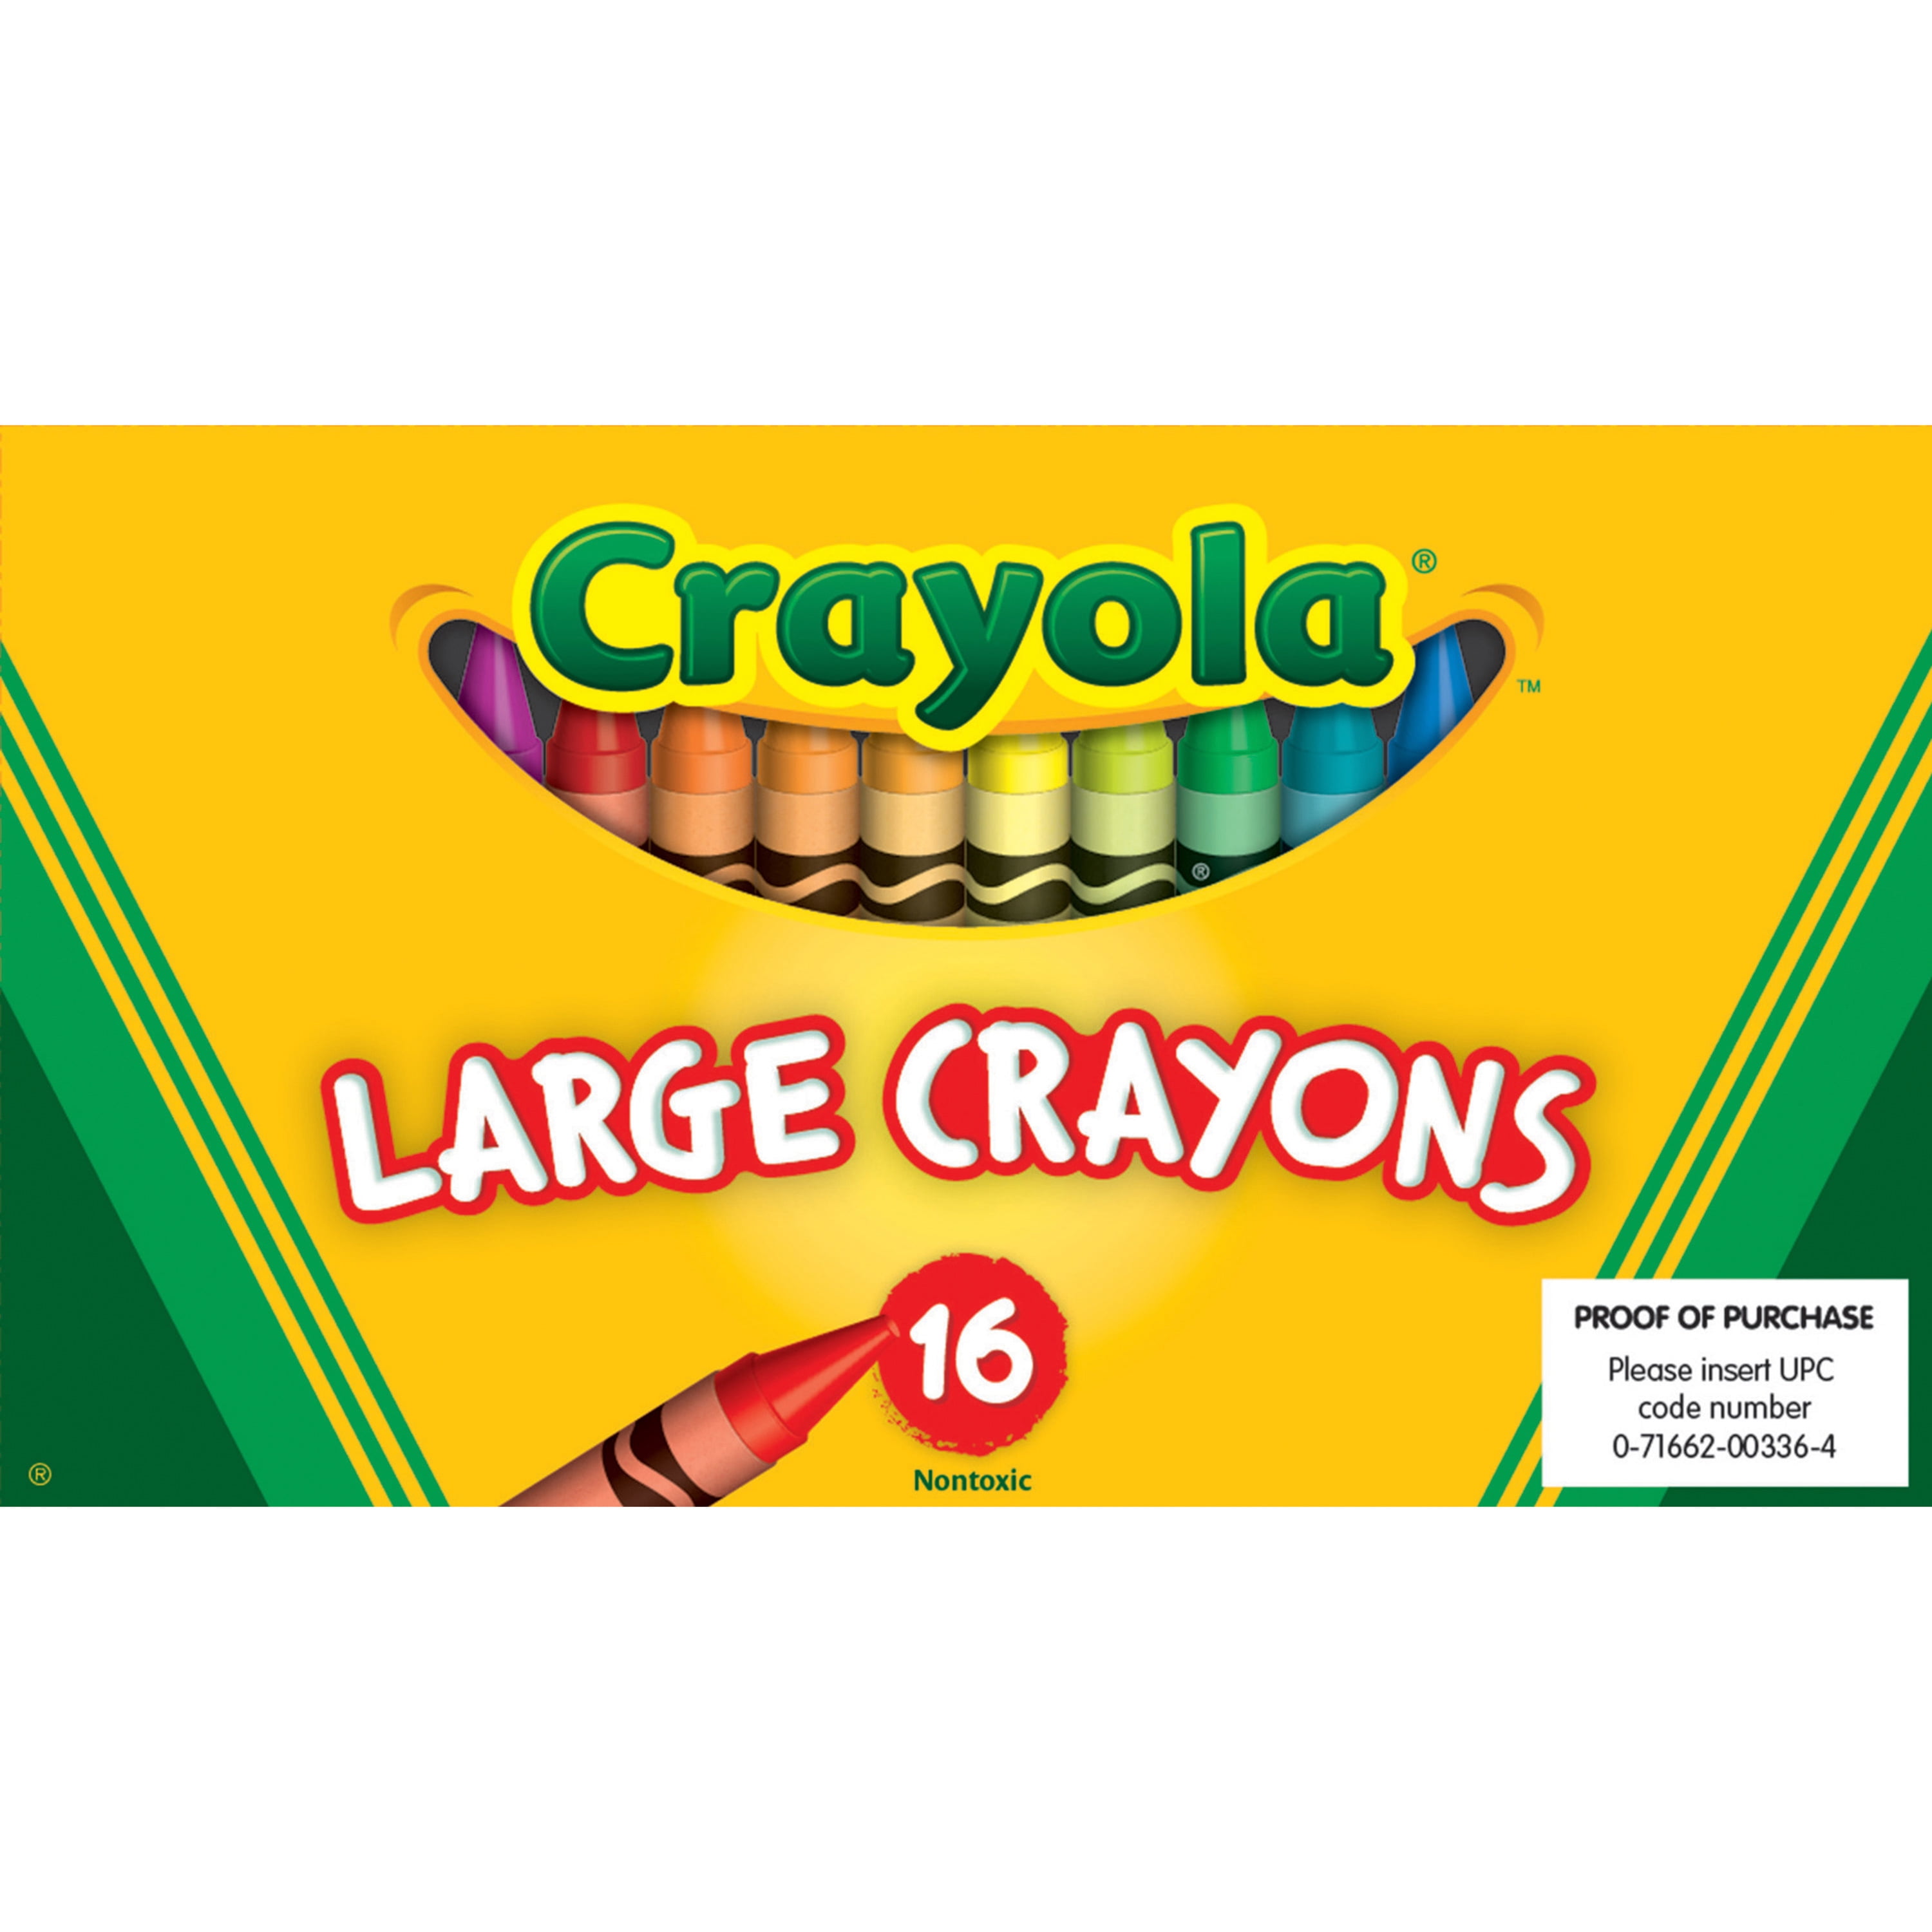 New Si World's Coolest Crayola Crayons 2 Colors Red & Yellow Really Works